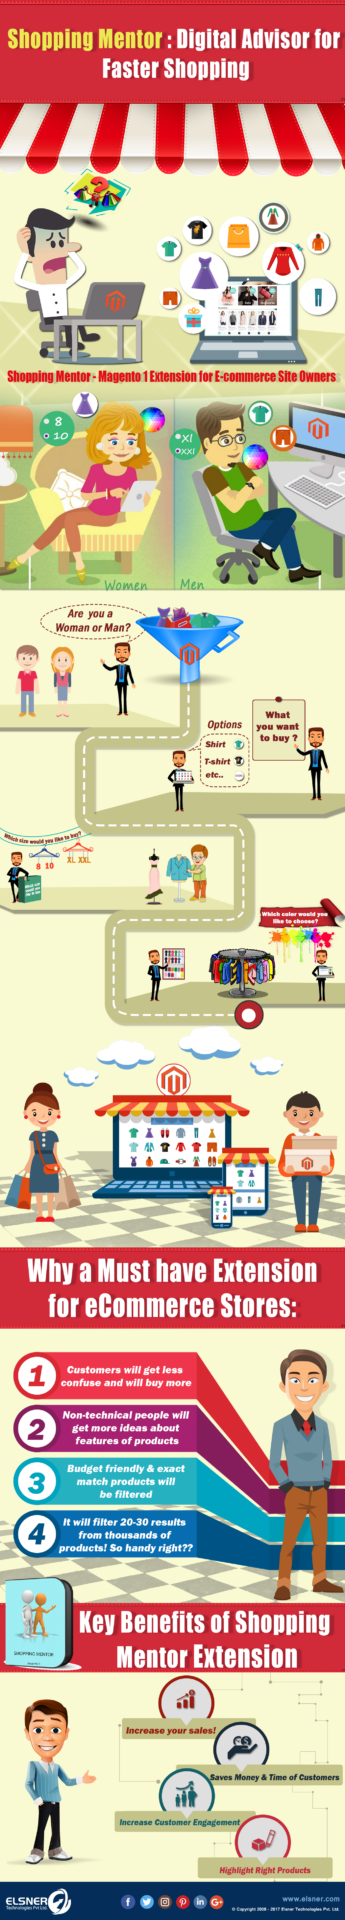 Shopping Mentor Infographic